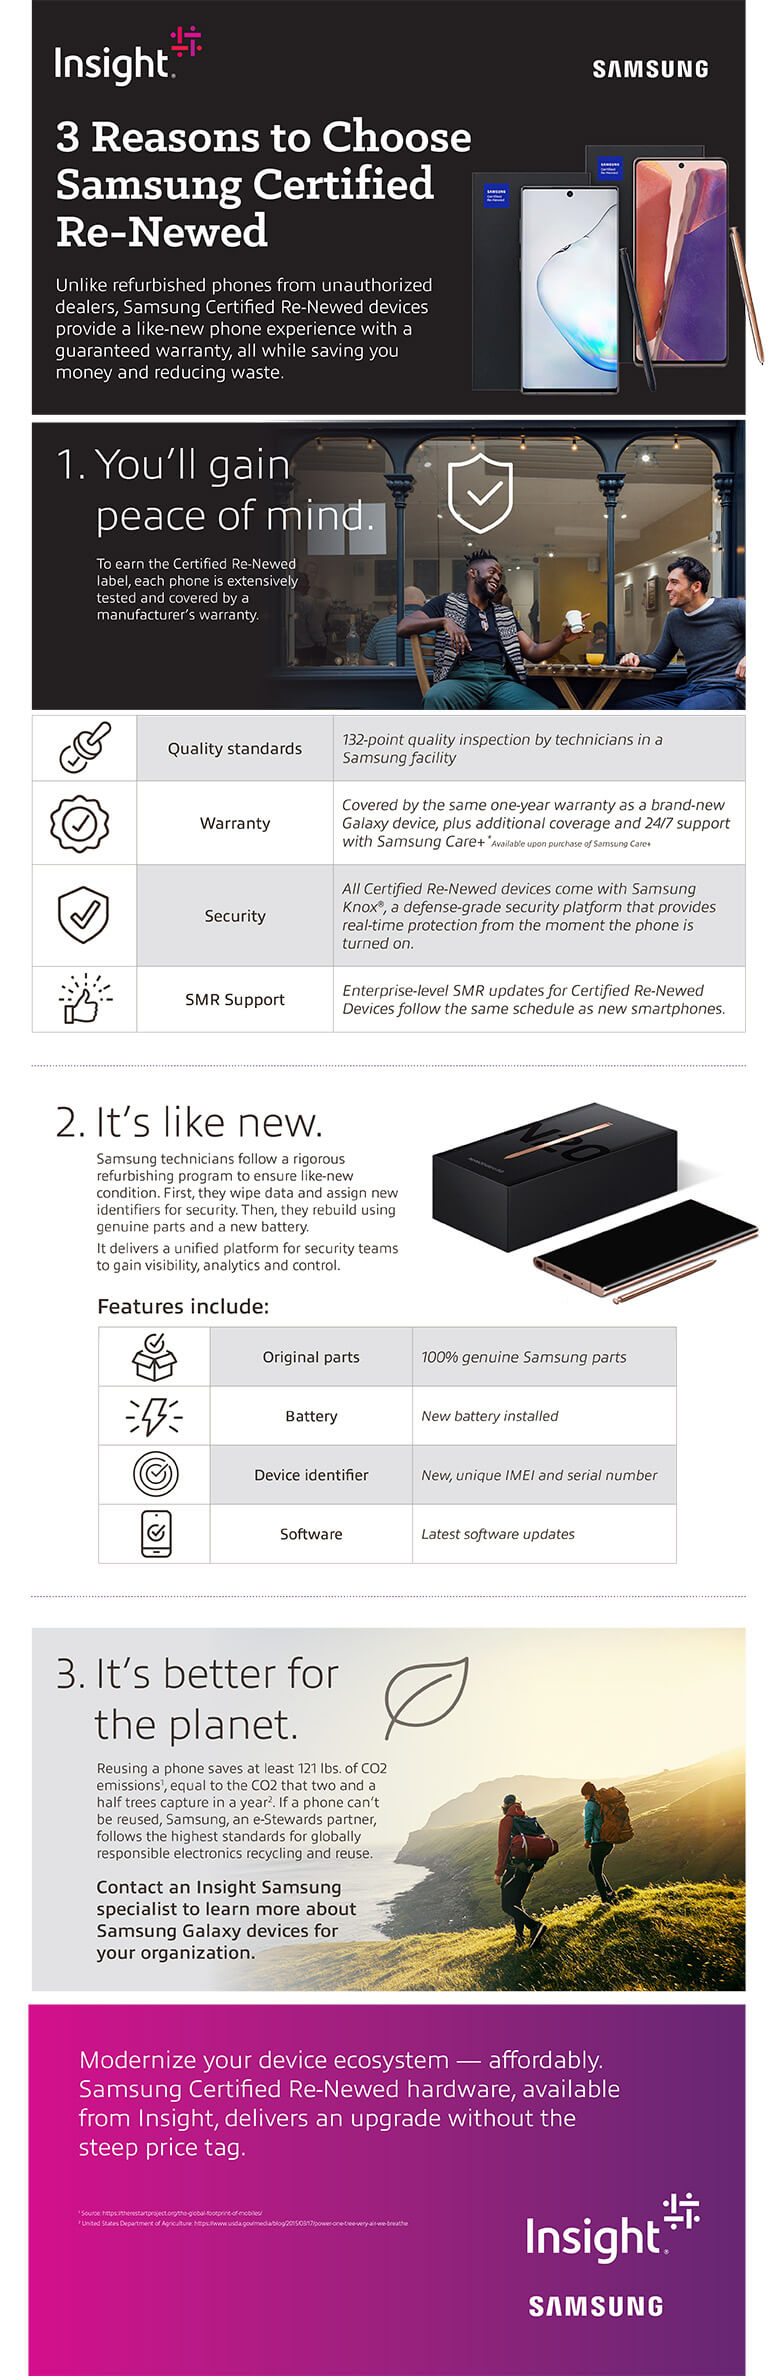 3 Reasons to Choose Samsung Certified Re-Newed infographic